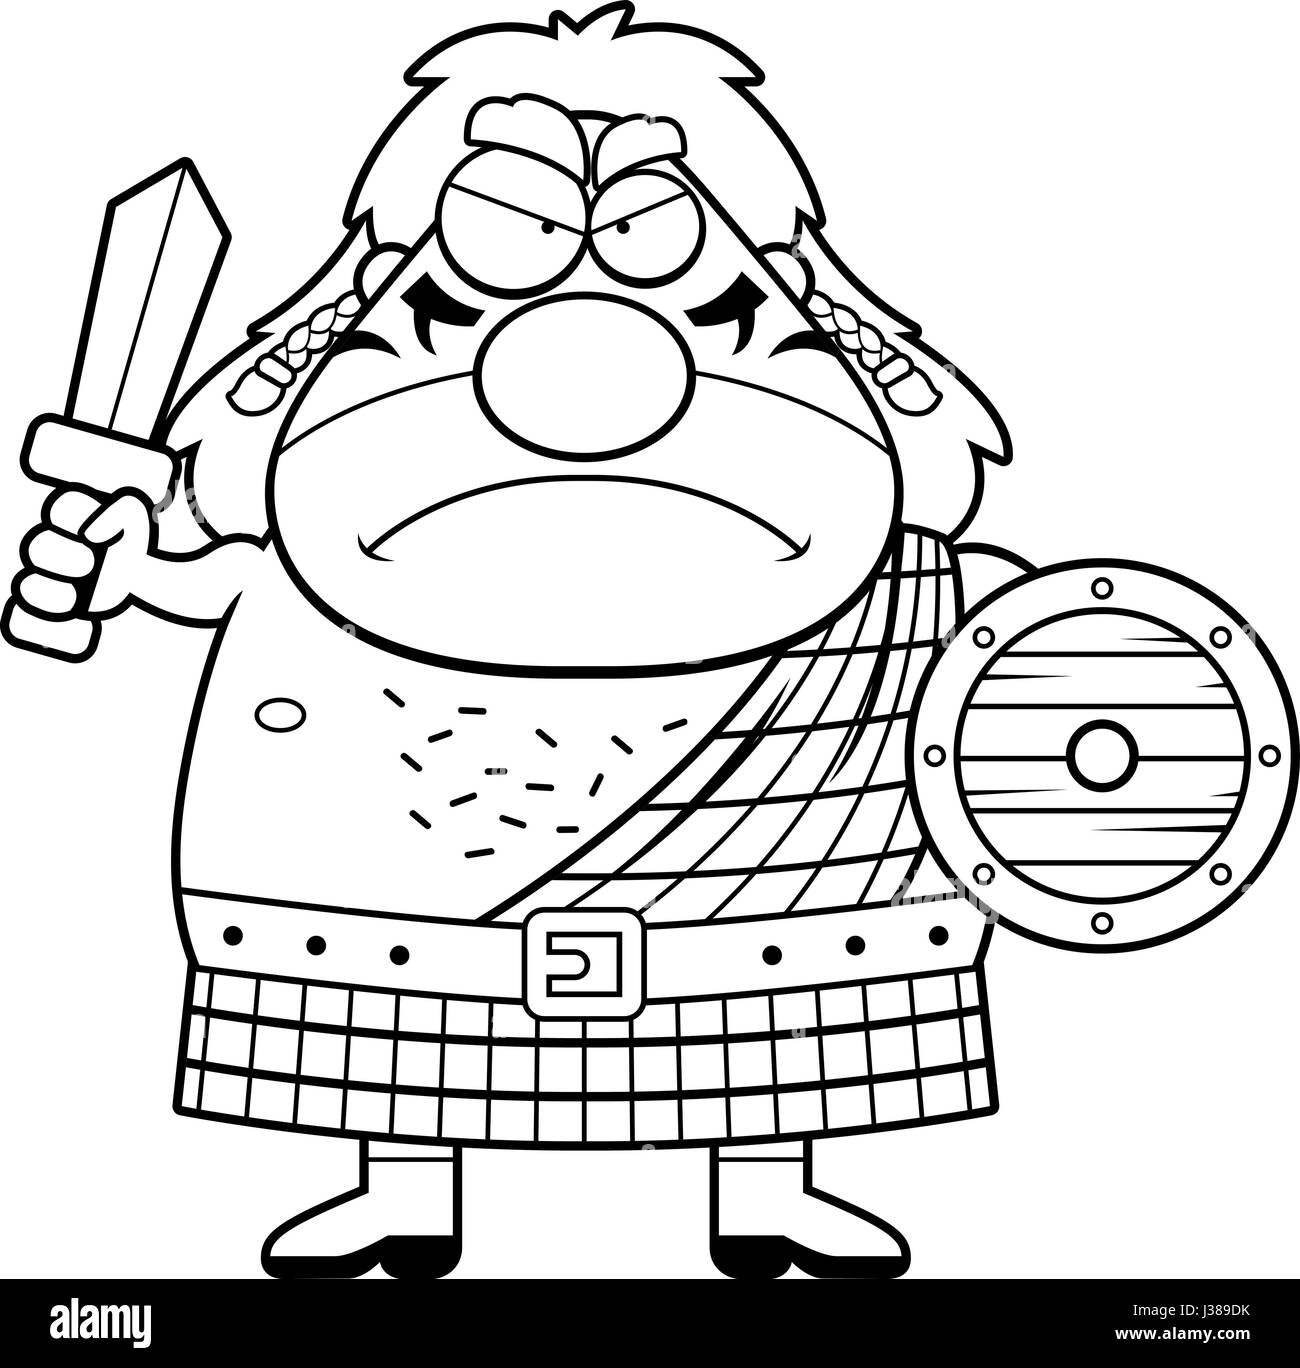 A cartoon illustration of a Celtic warrior looking angry. Stock Vector